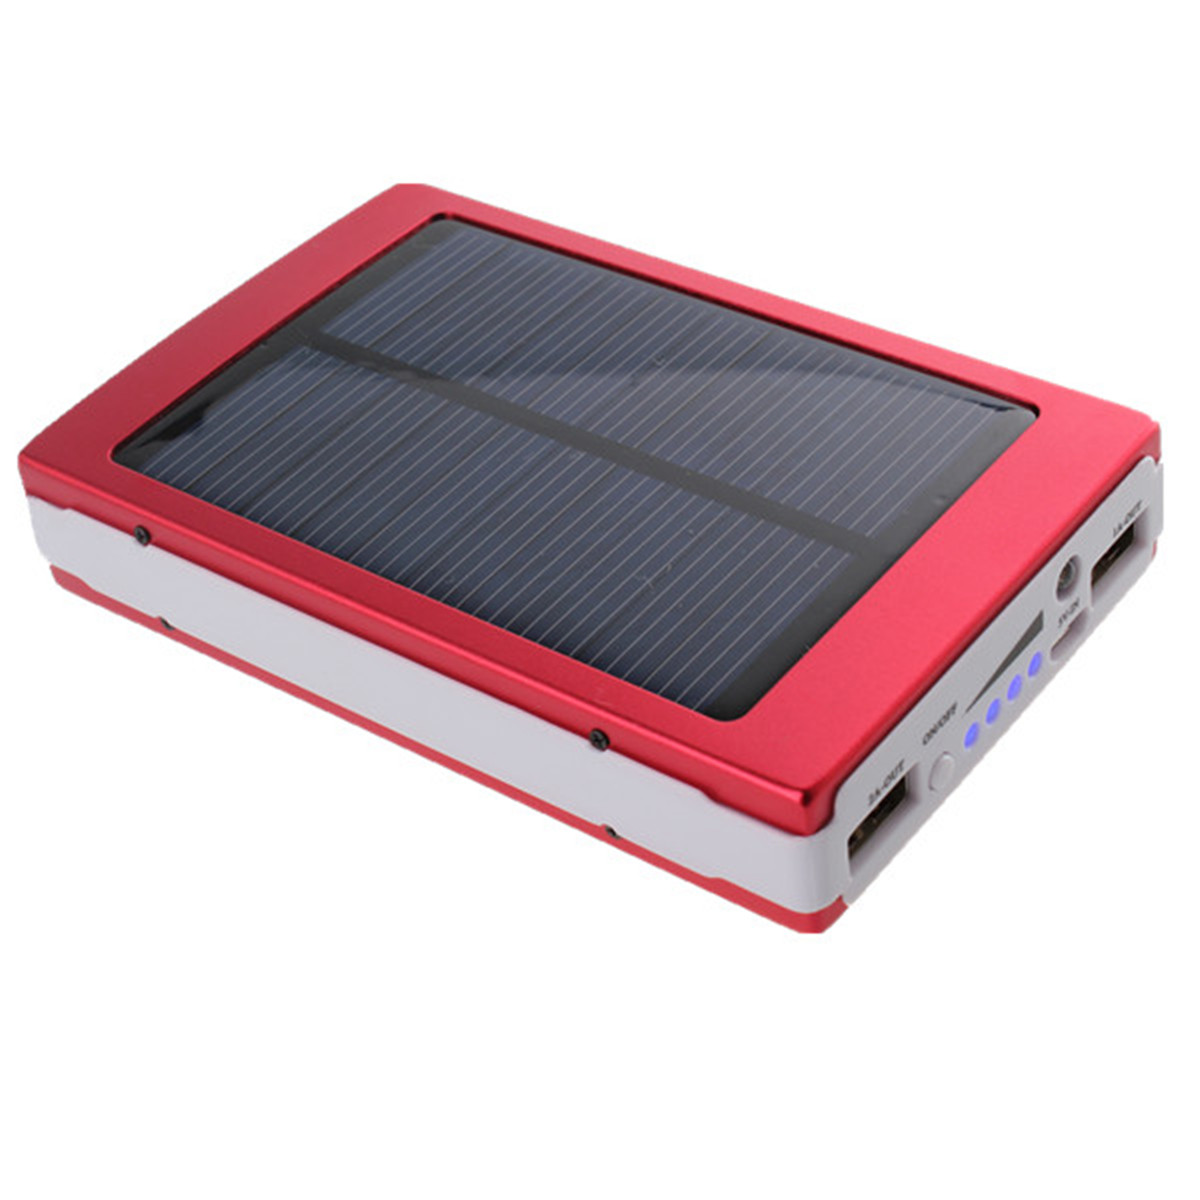 Portable-Solar-Panel-Dual-USB-External-Mobile-Battery-Power-Bank-Pack-Charger-for-iPhone-HTC-1419461-8